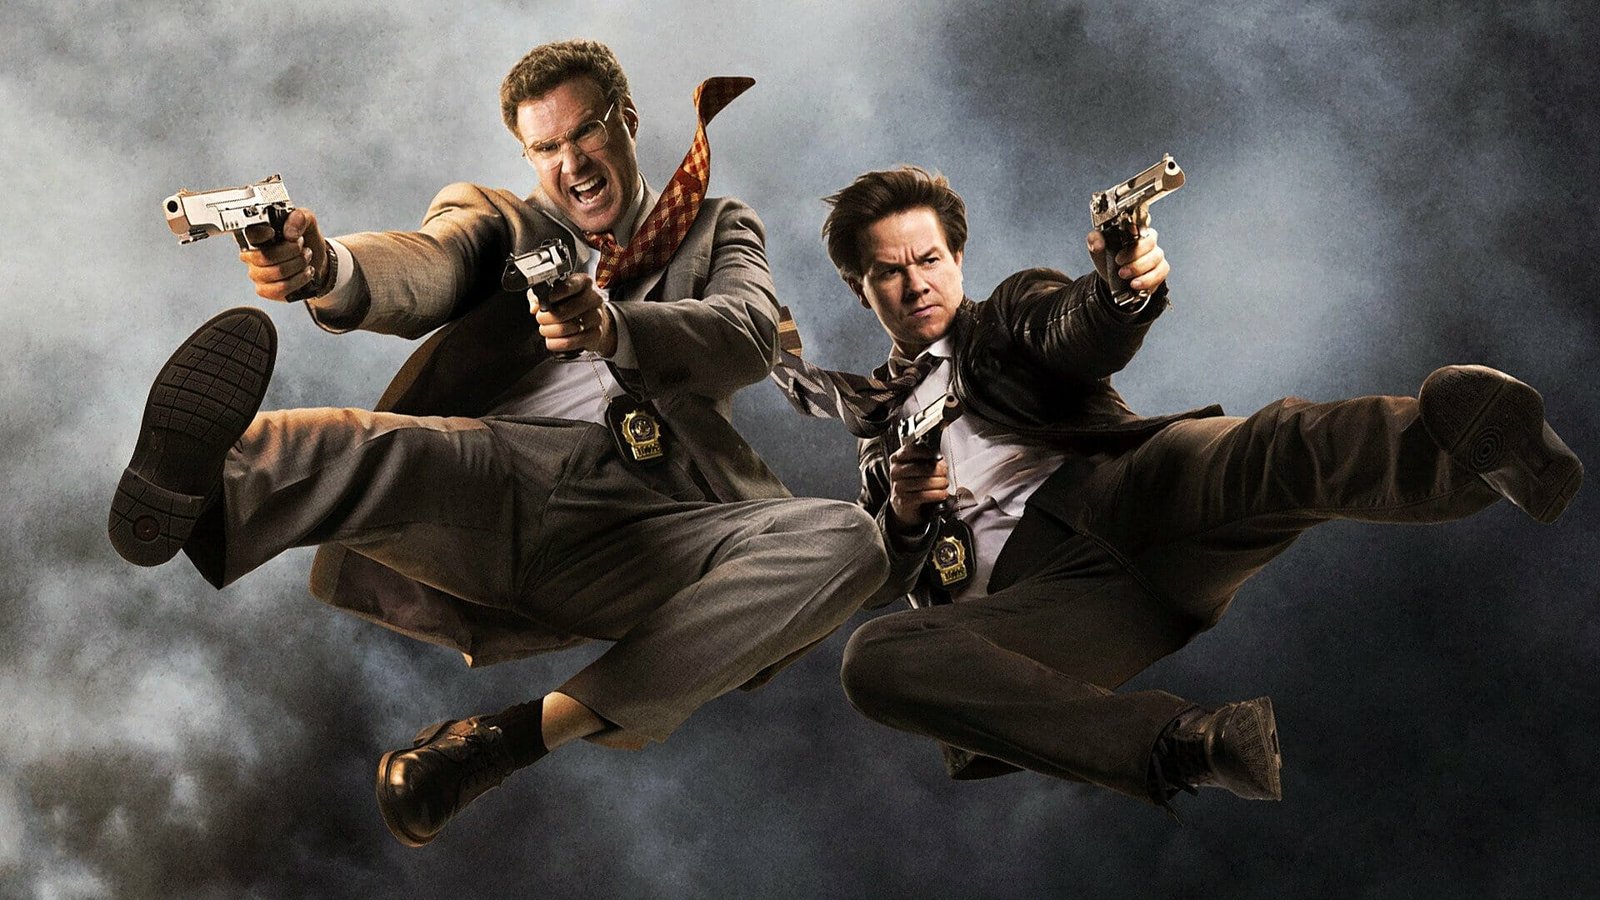 Best movies on Hulu: The Other Guys